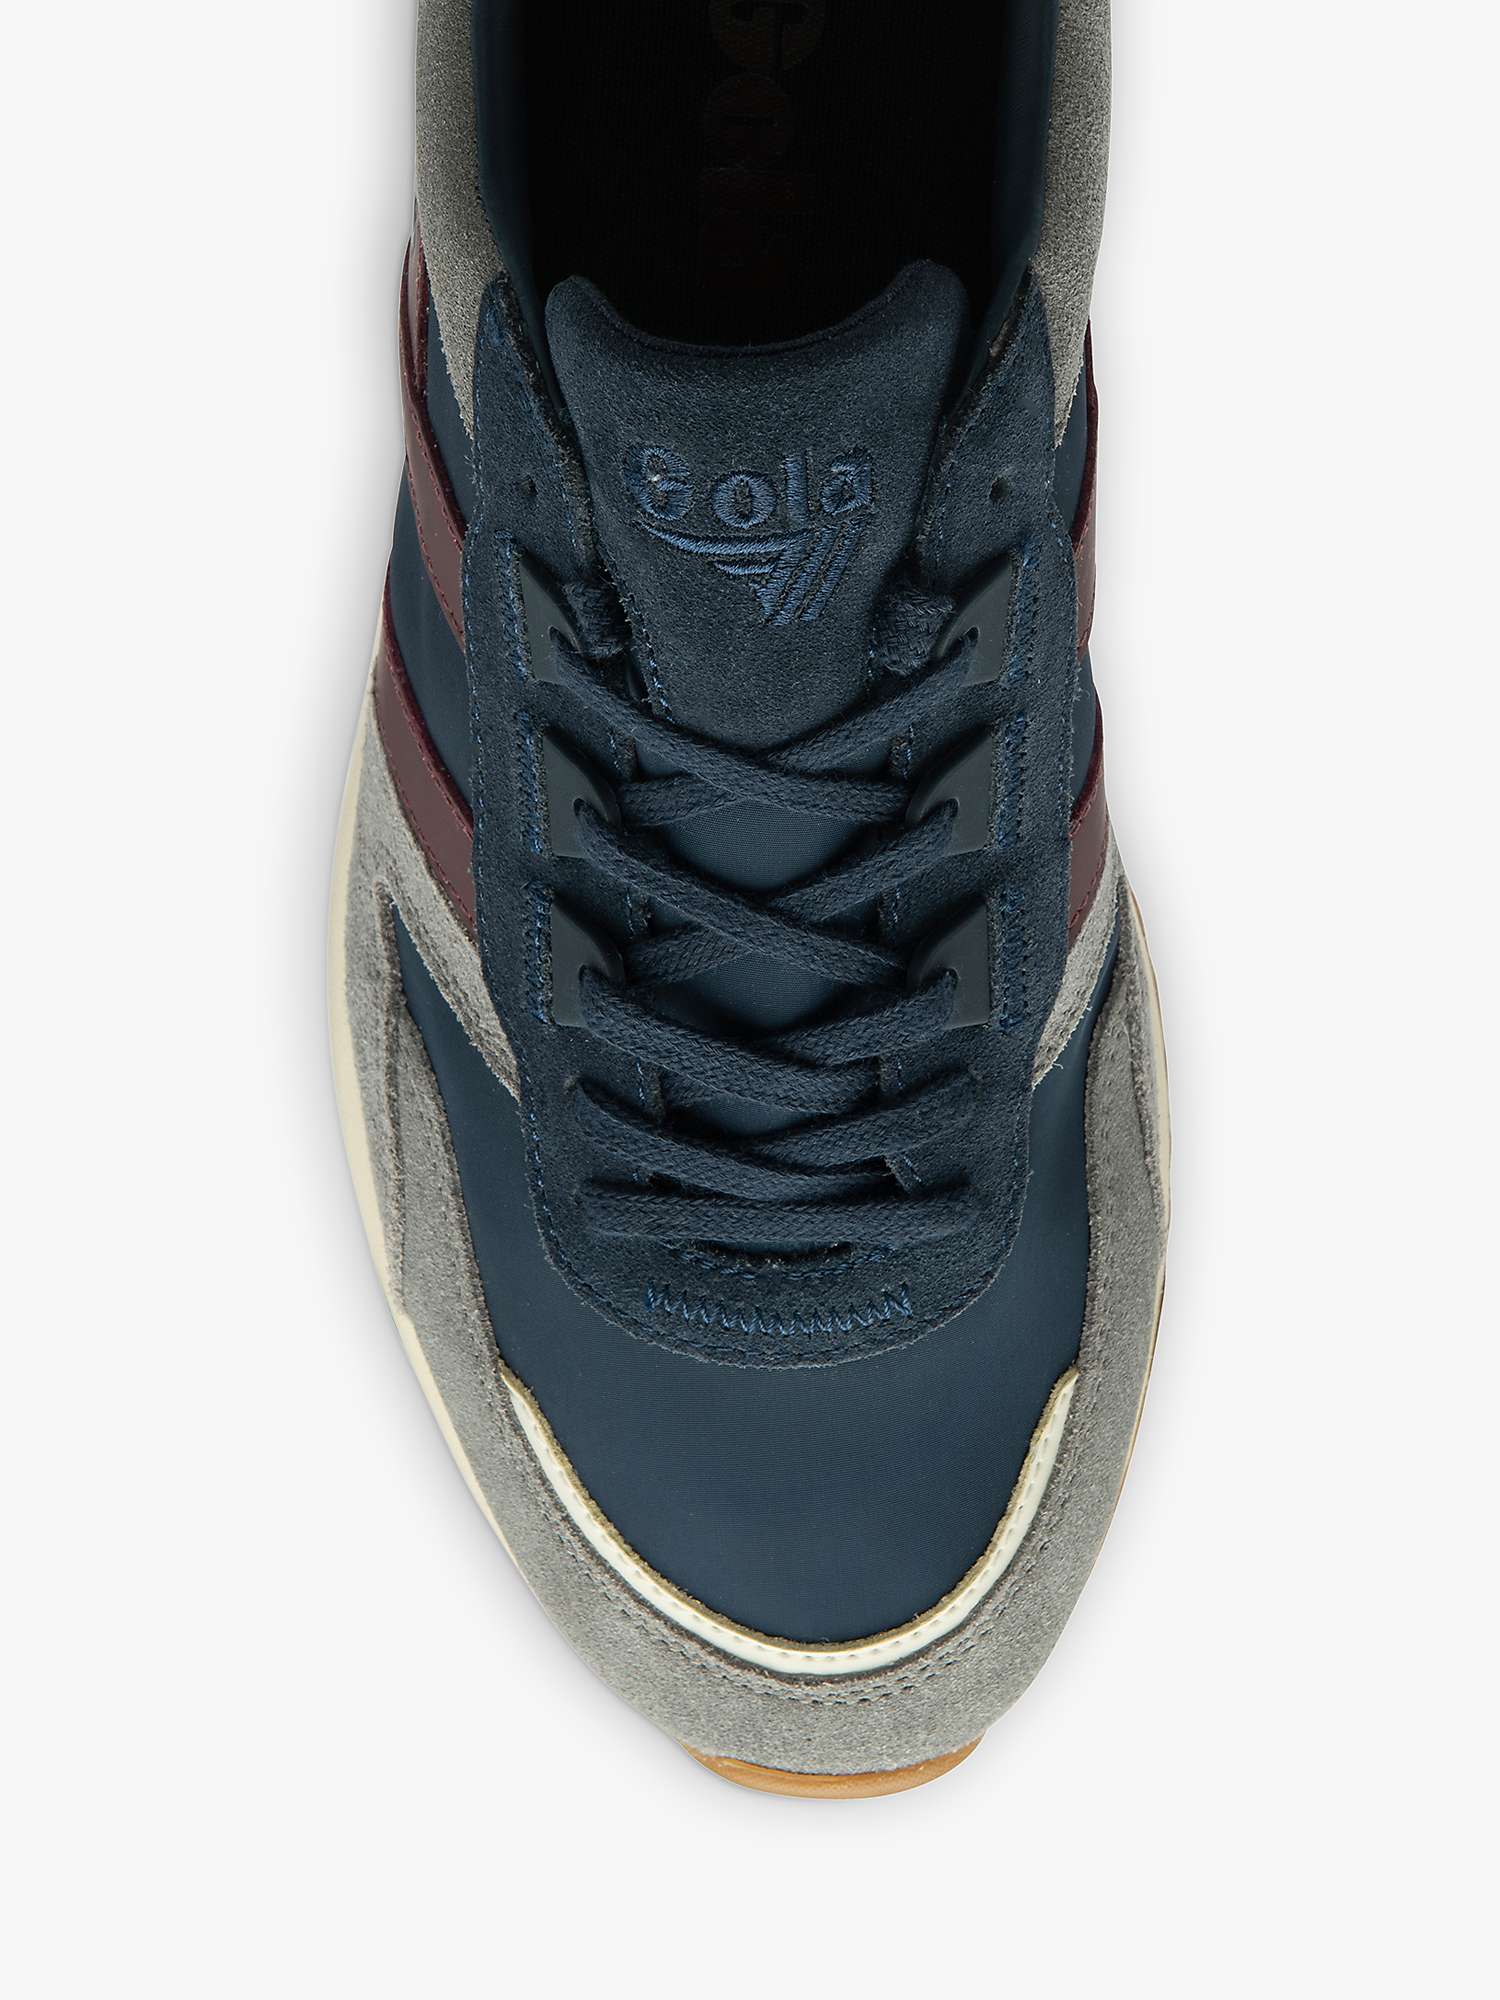 Buy Gola Classics Chicago Lace Up Trainers, Grey/Navy Online at johnlewis.com